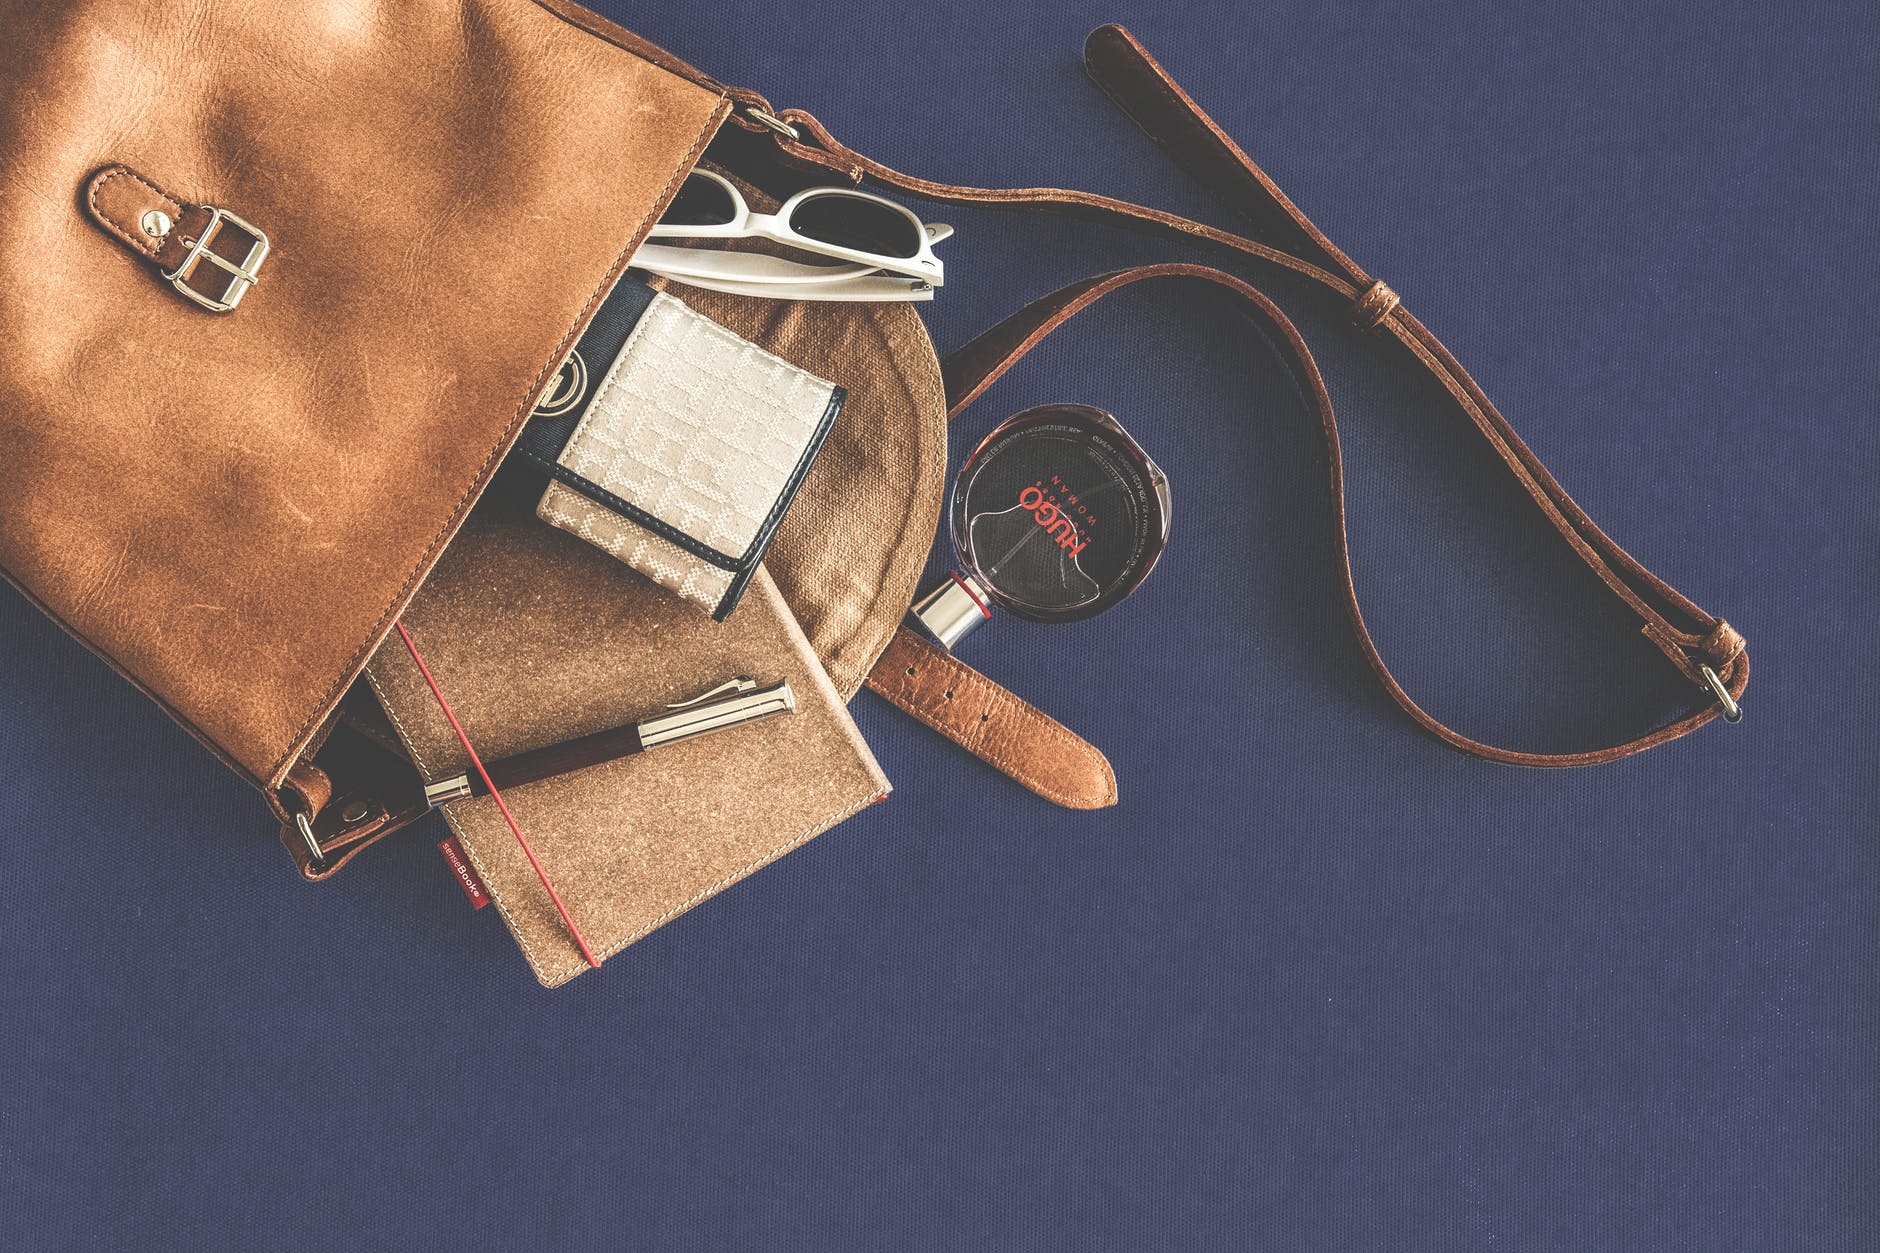 My purse was getting a little old, and I hoped Allan would buy me a new one. | Source: Pexels